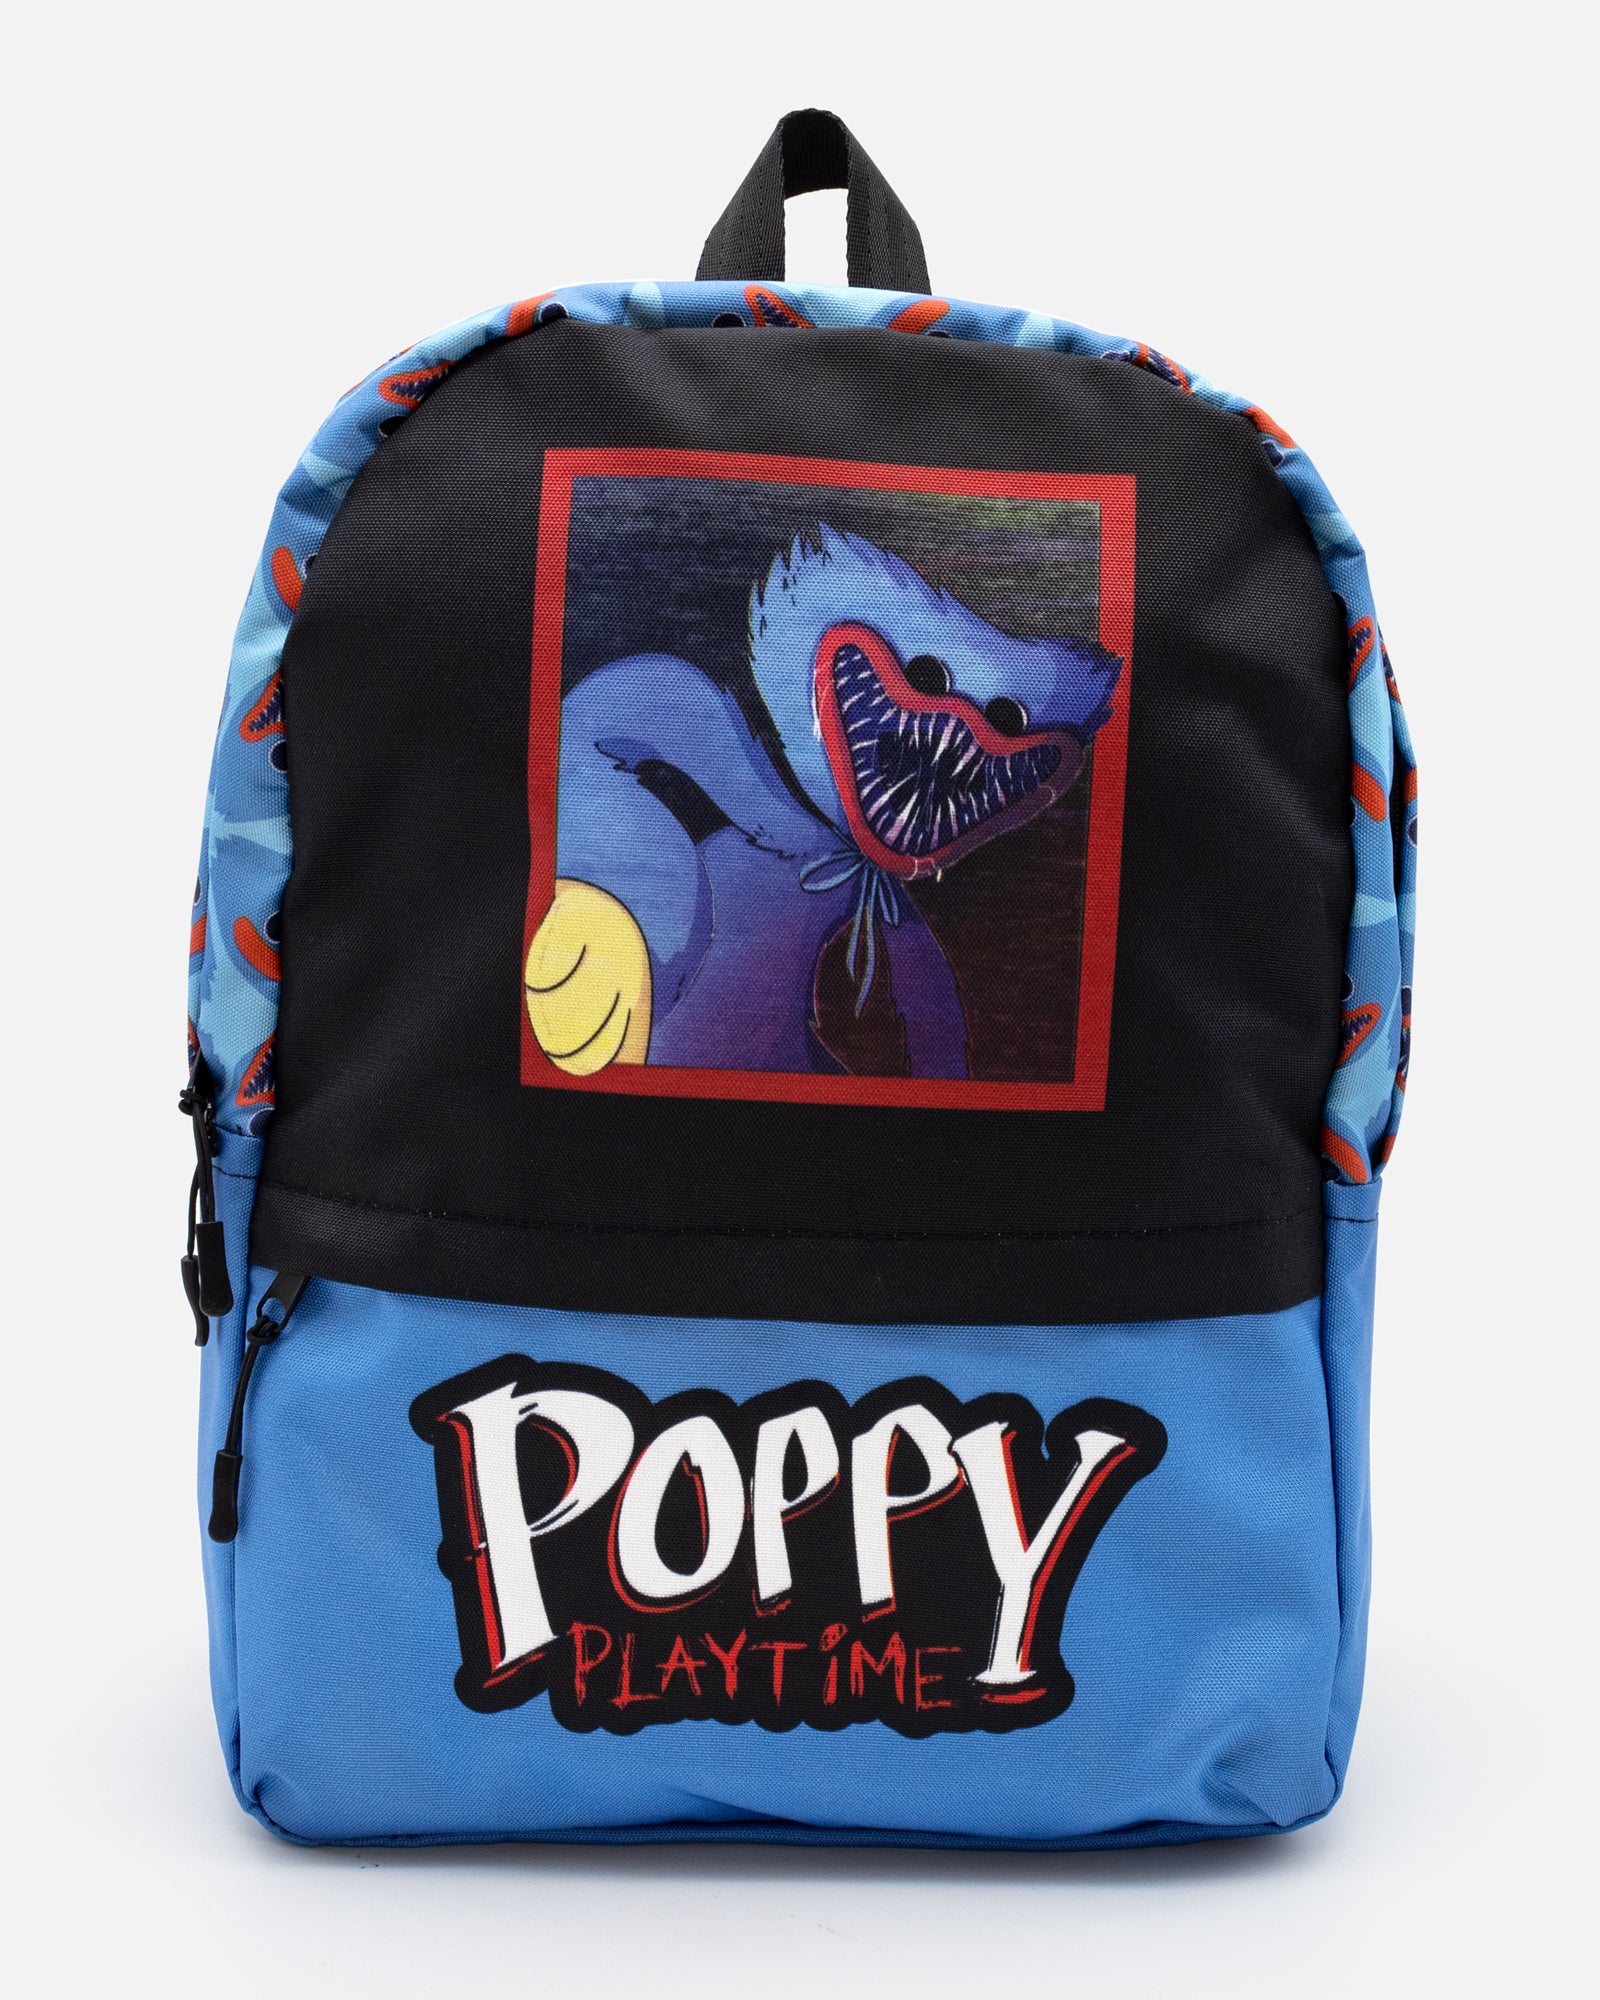 huggy wuggy attack backpack front. image on top portion: player character holding boxy boo toy. image on bottom portion: poppy playtime logo. repeating all over huggy face pattern on outer top lining